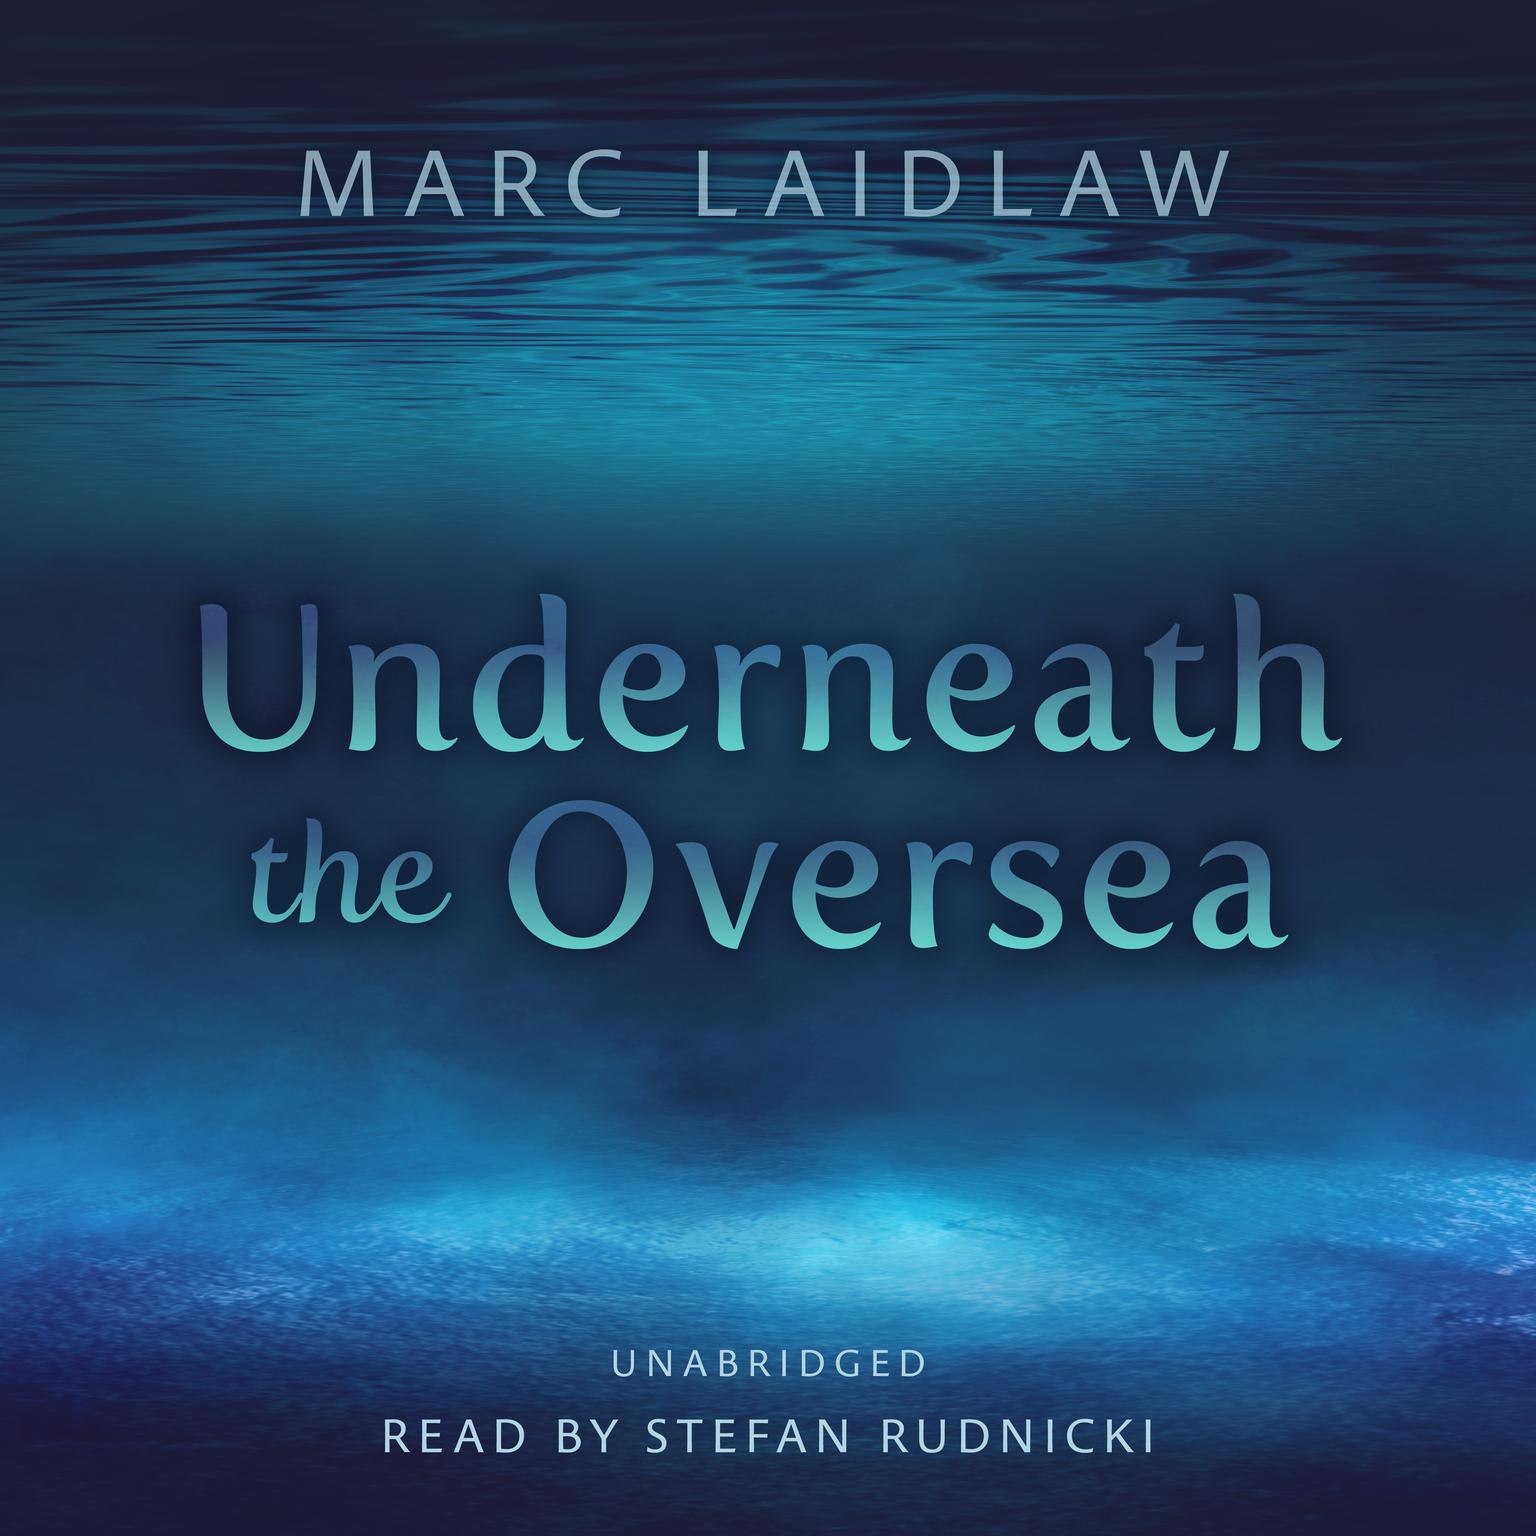 Underneath the Oversea Audiobook, by Marc Laidlaw